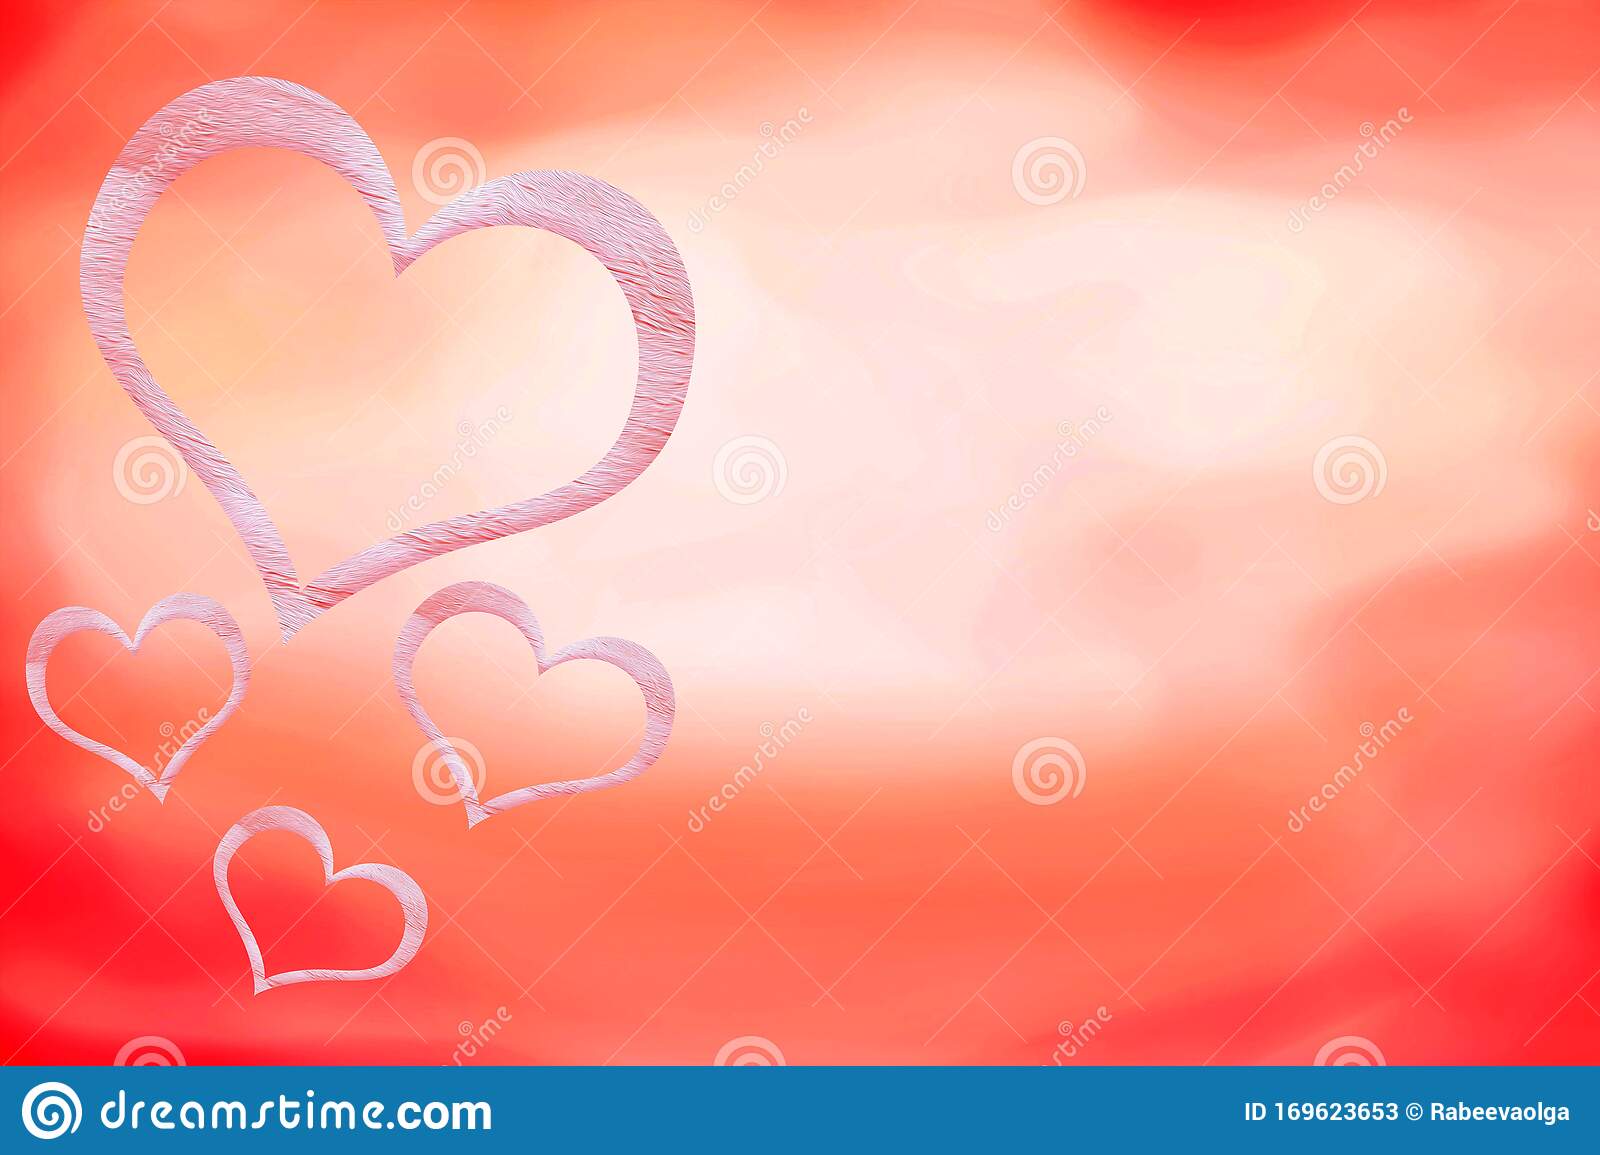 Romantic background with hearts on the left stock image